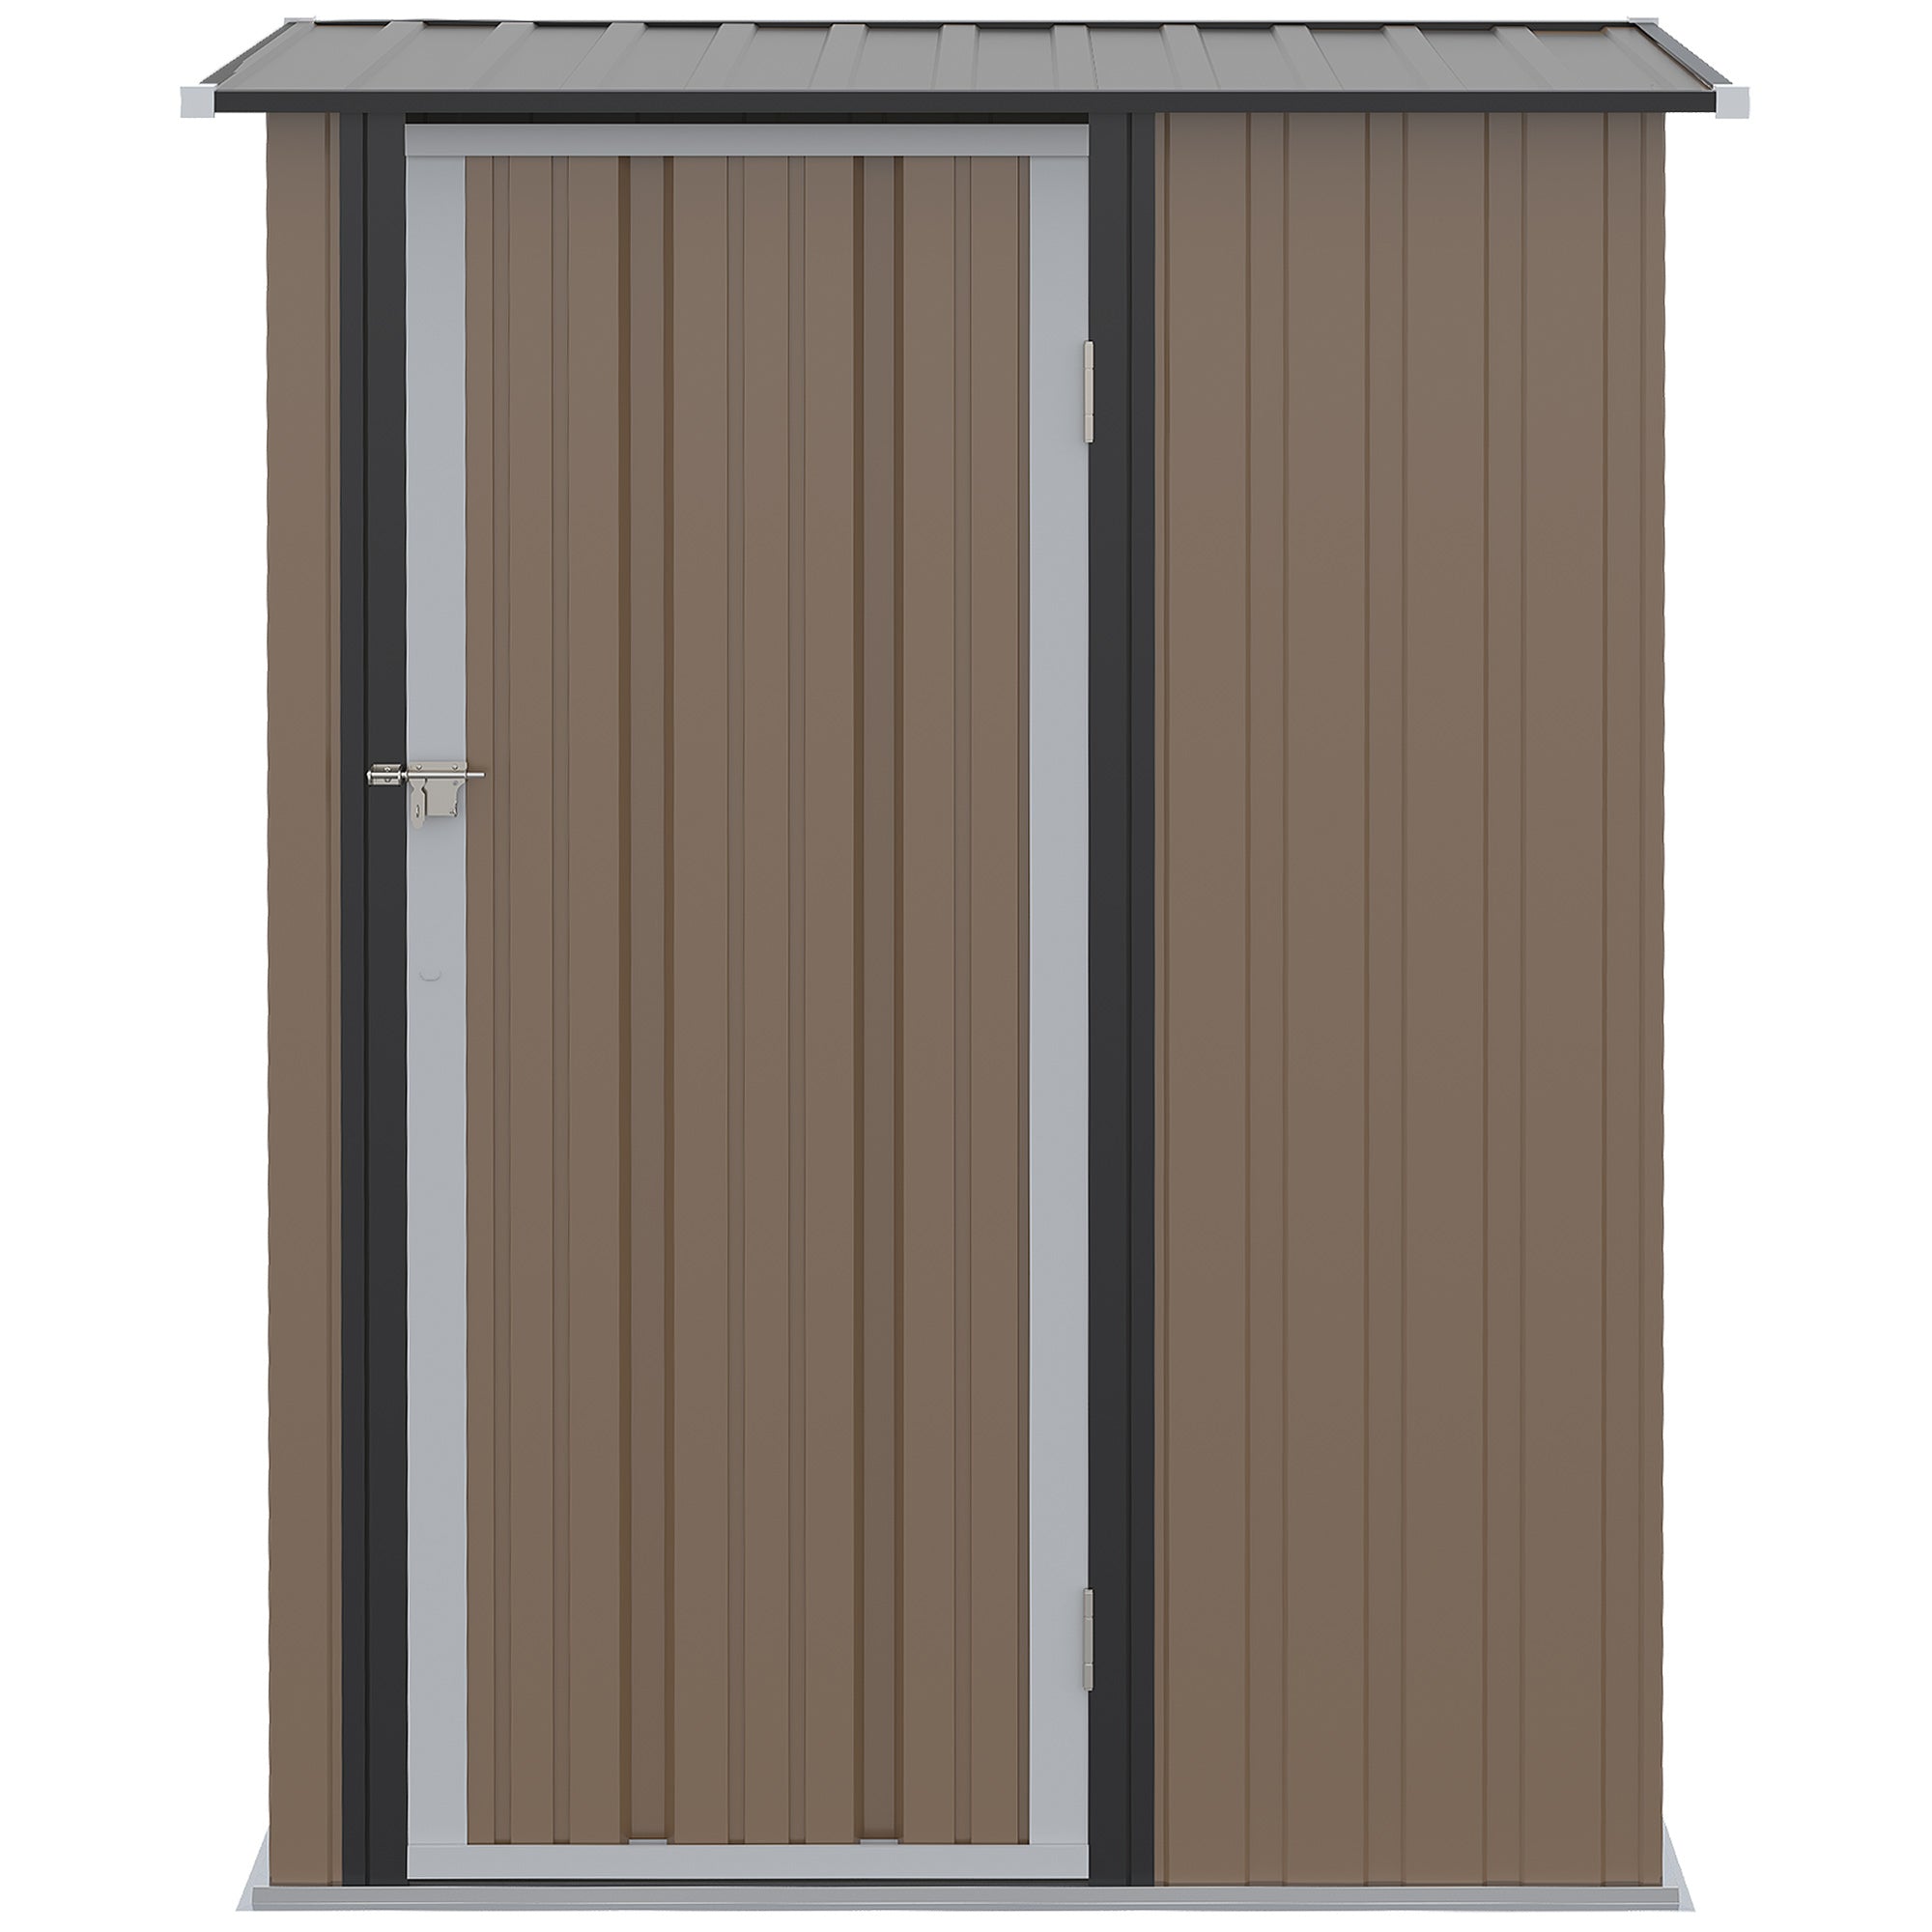 Outsunny 5ft x 3ft Garden Metal Storage Shed, Outdoor Tool Shed with Sloped Roof, Lockable Door for Equipment, Bikes, Brown - TovaHaus